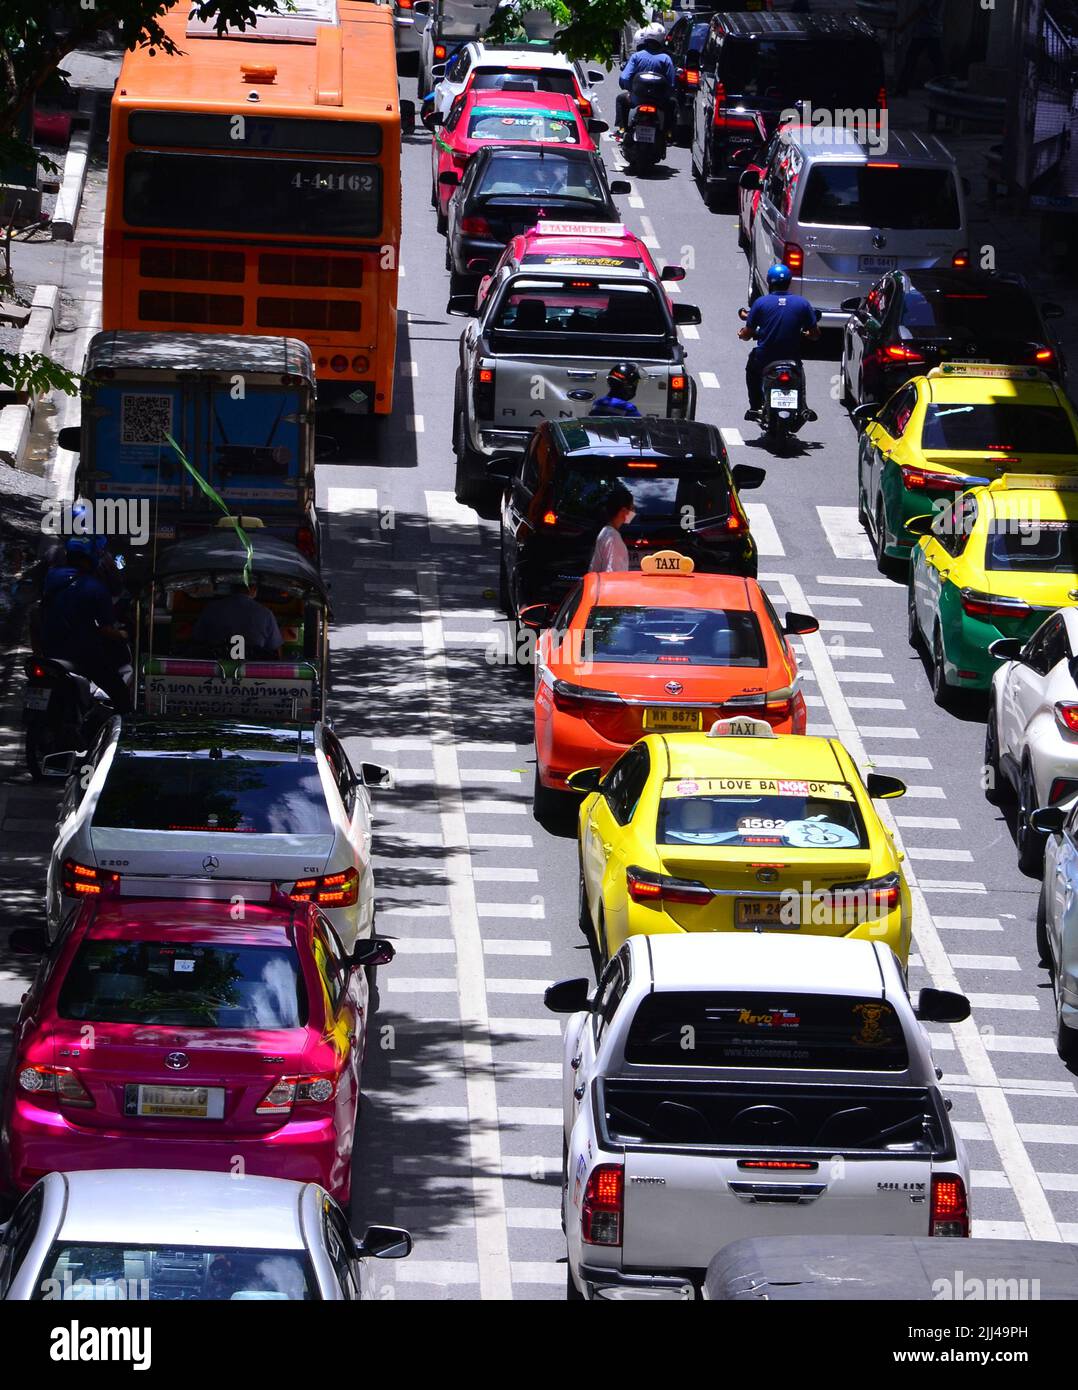 Traffic jam of cars, motorbikes and a bus on Silom Road, Bangkok, Thailand, Asia, as drivers of vehicles struggle to make progress in busy daytime traffic. Stock Photo